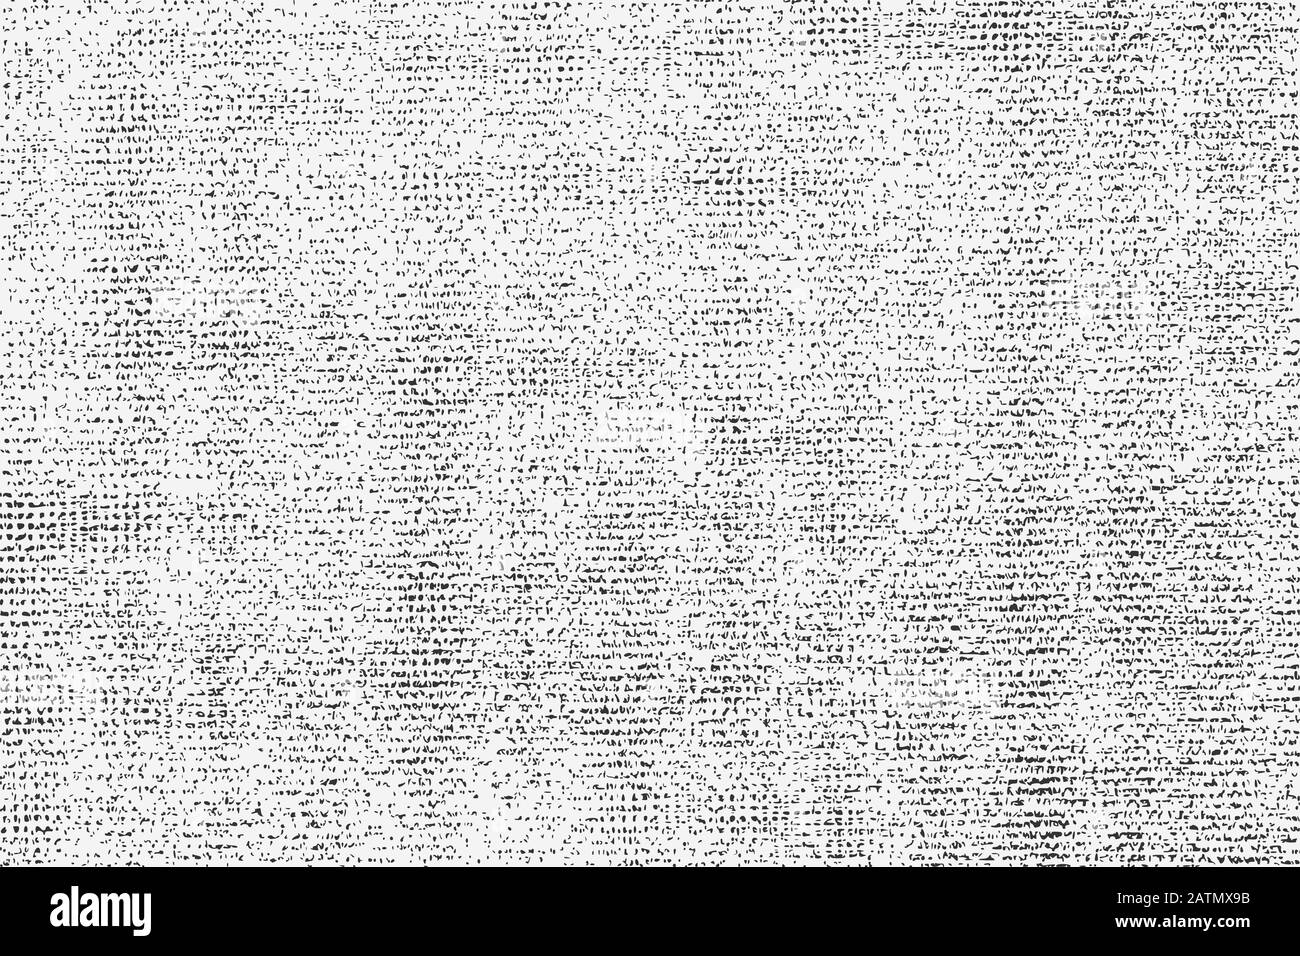 Abstract grunge overlay fabric texture. Vector illustration of black and white grunge background for your design Stock Vector